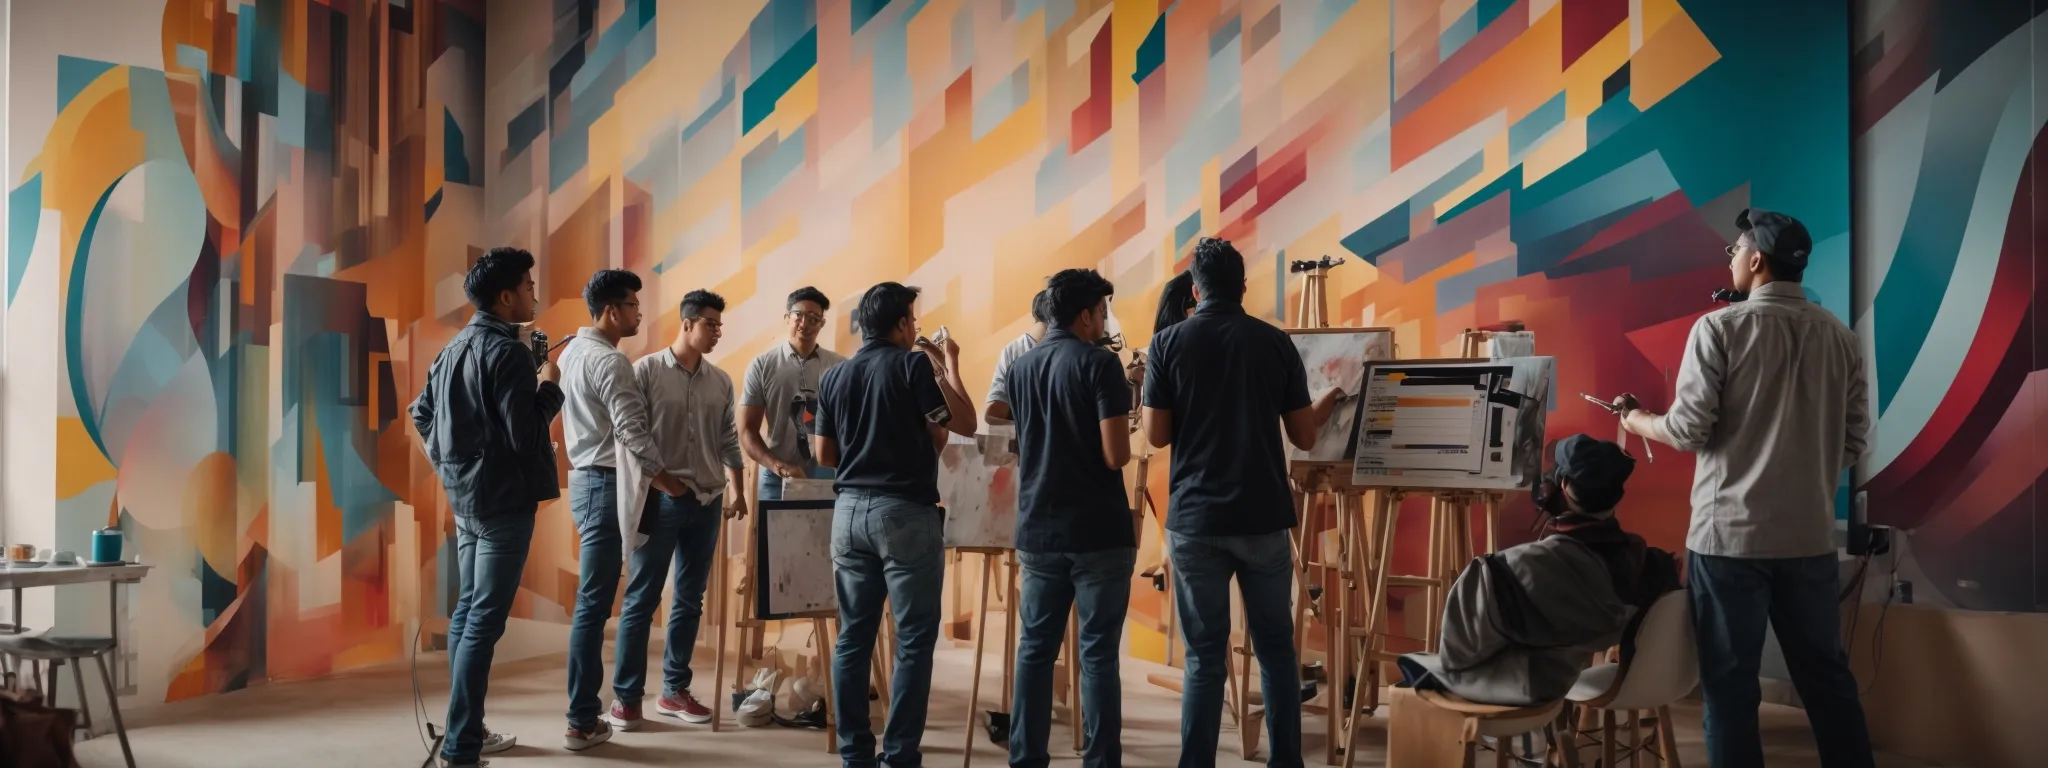 a muralist paints a vibrant, abstract mural while a group of marketers discuss strategy in front of a giant analytics dashboard.